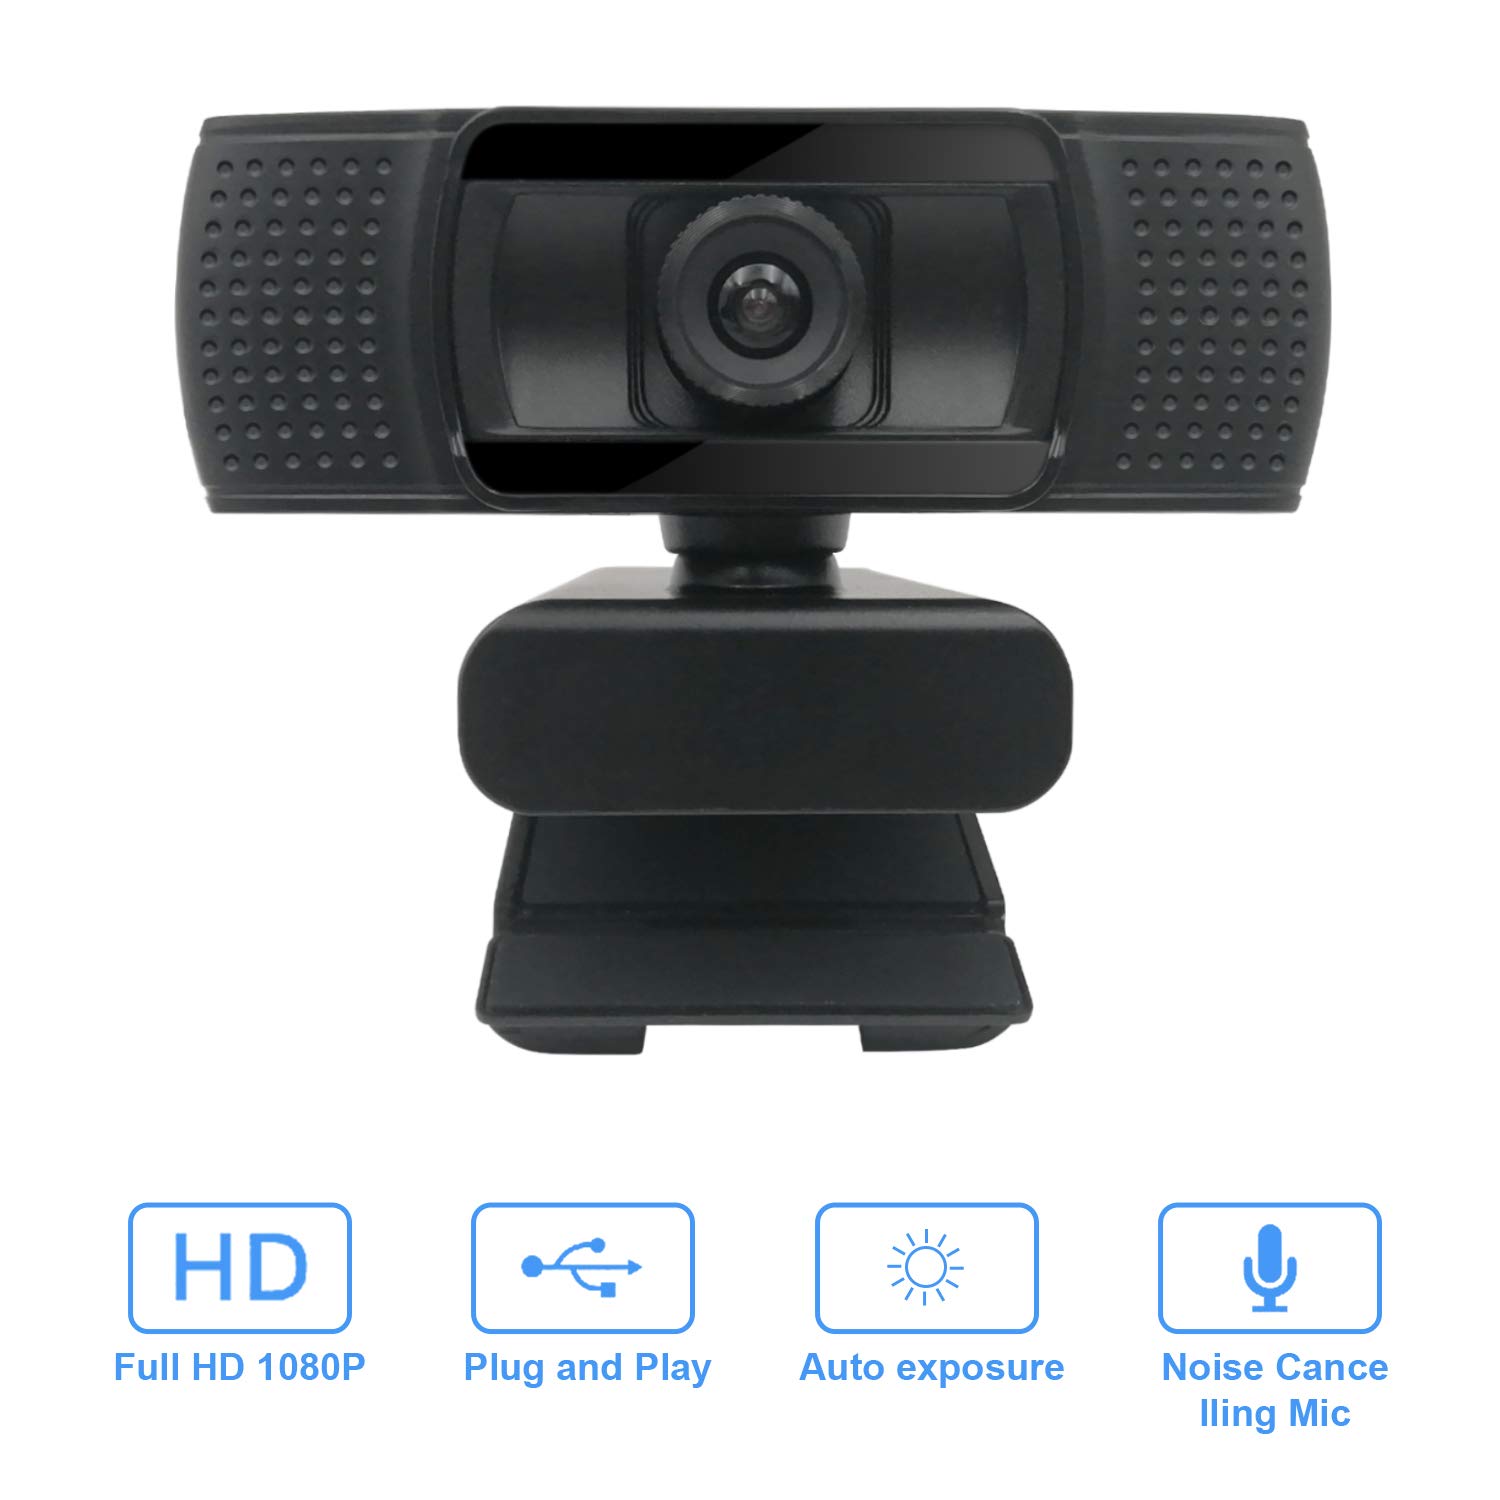 Anivia 1080p HD Fixed Focus Webcam, USB Camera with Microphone Free Cover Slide, Mini Plug and Play Video Calling Computer Camera, Built-in Mic, Flexible Rotatable Clip(The Tripod not Included)